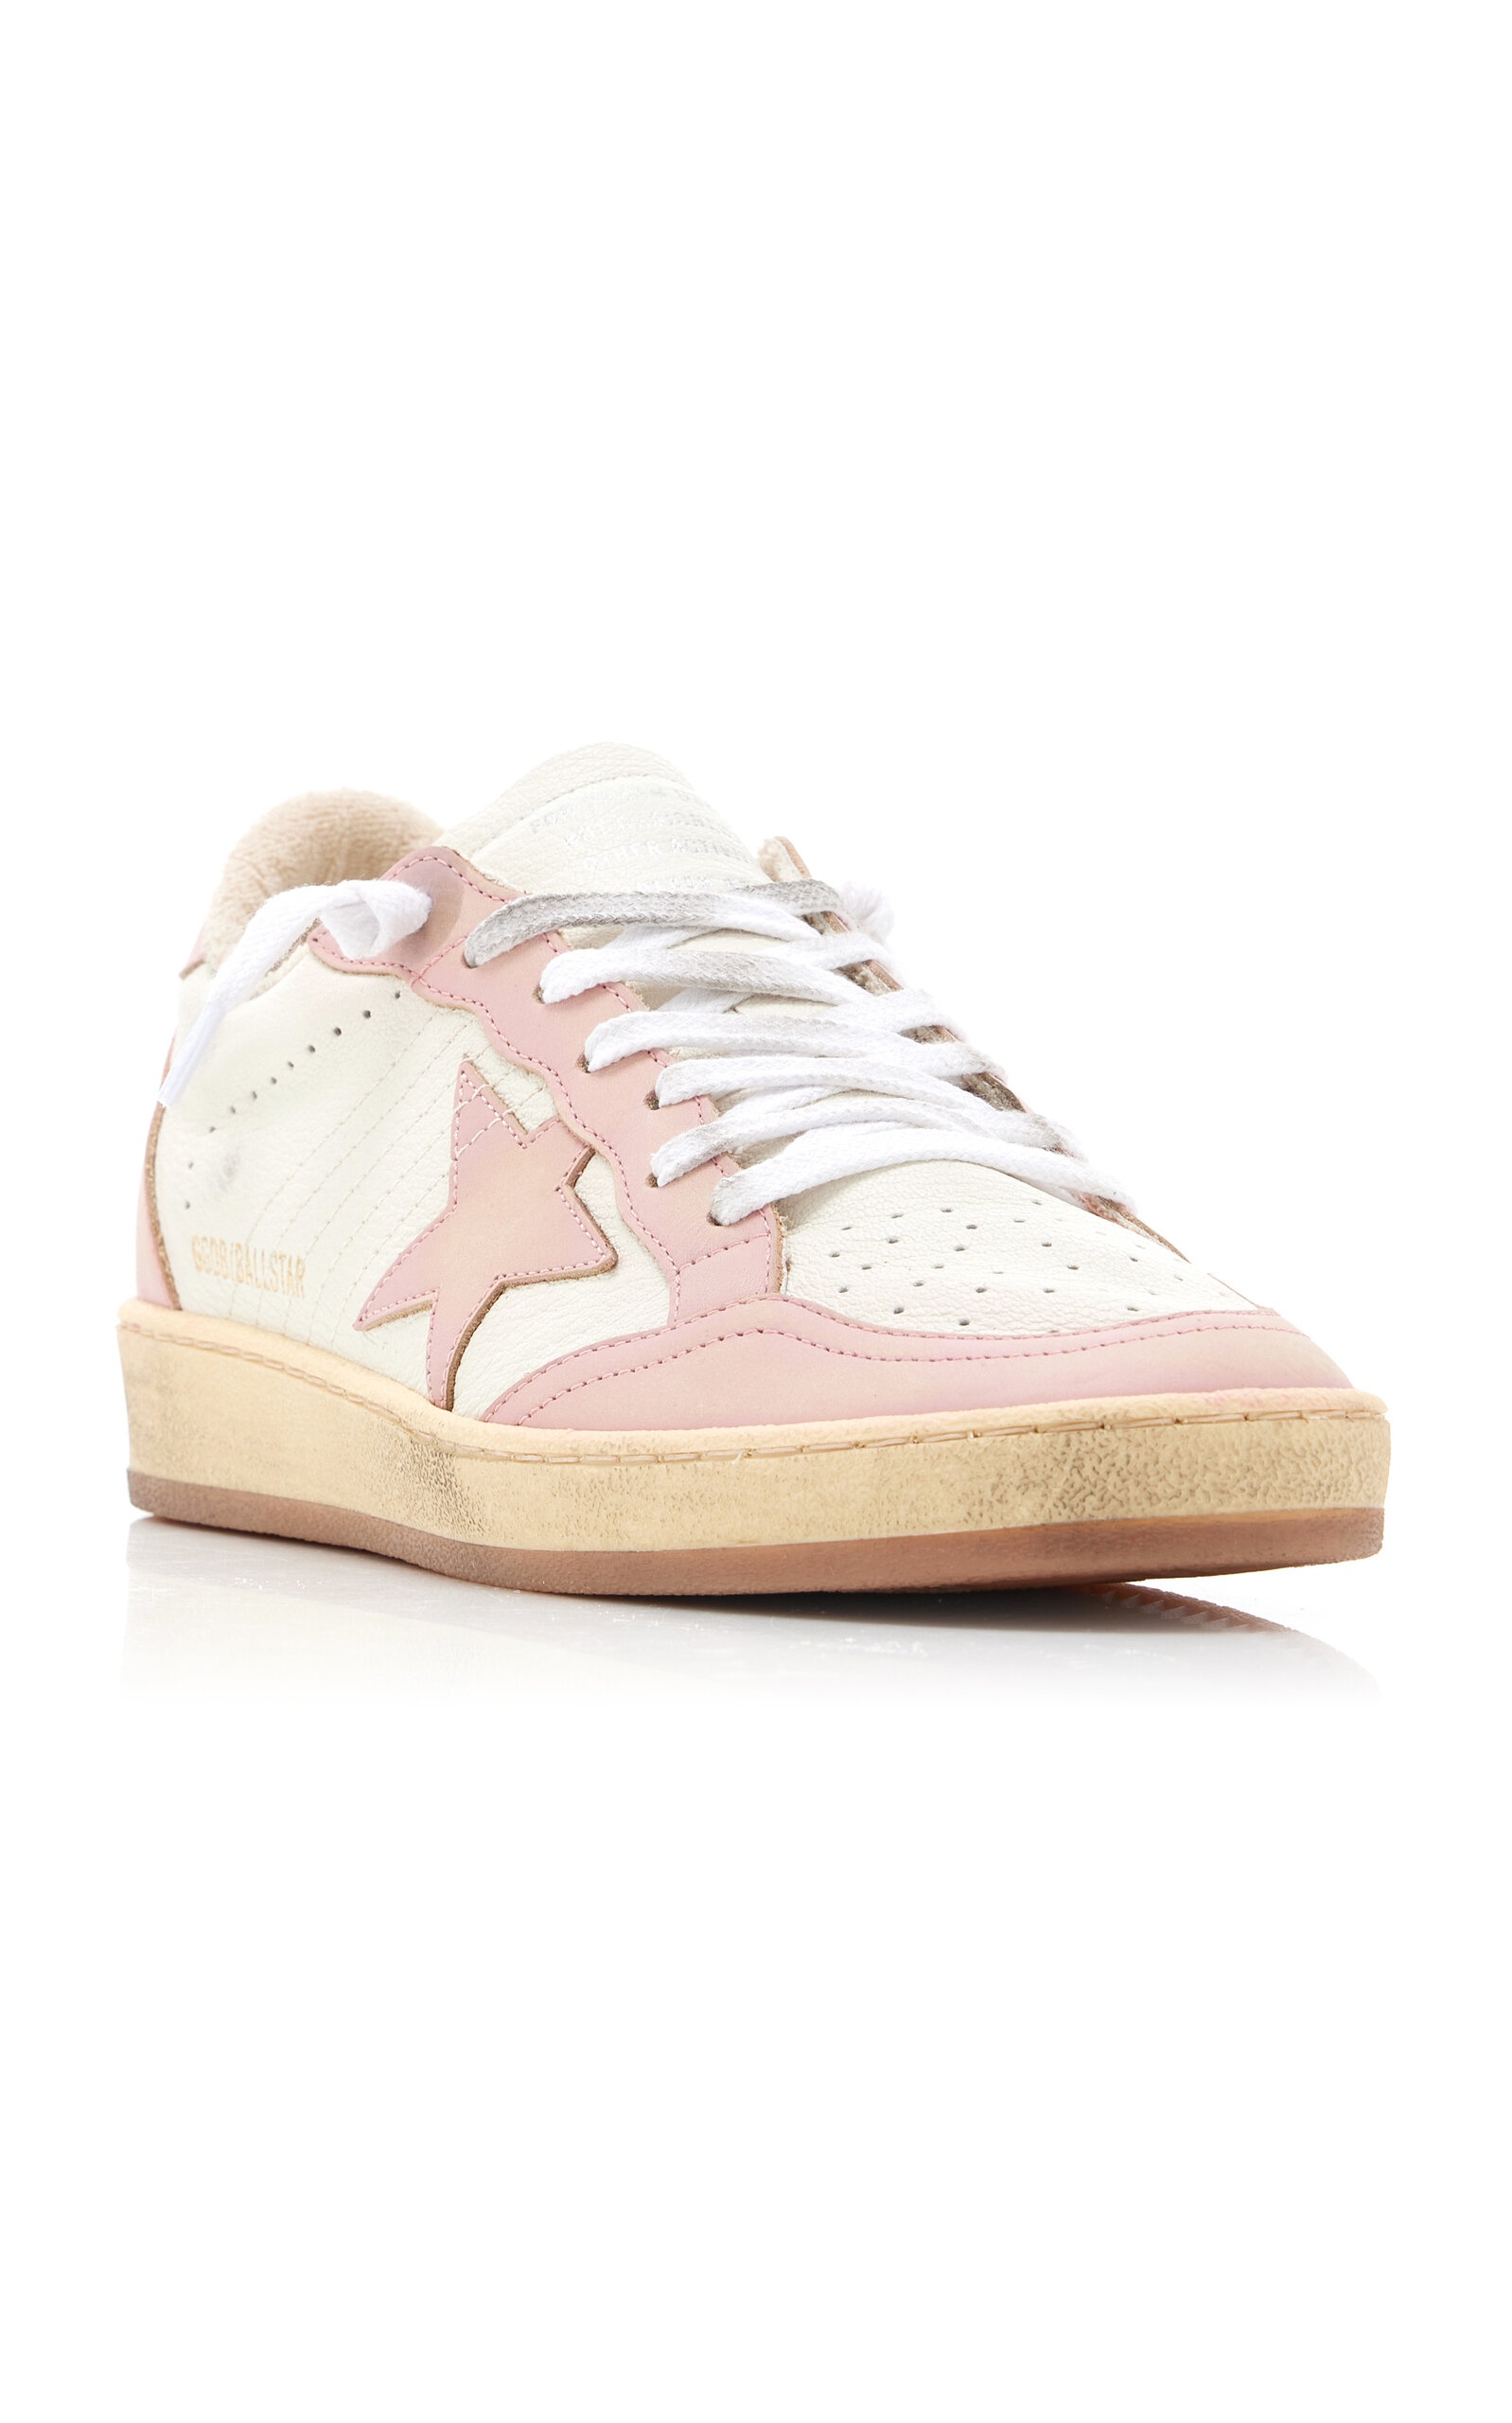 Ballstar Leather Sneakers pink - 5